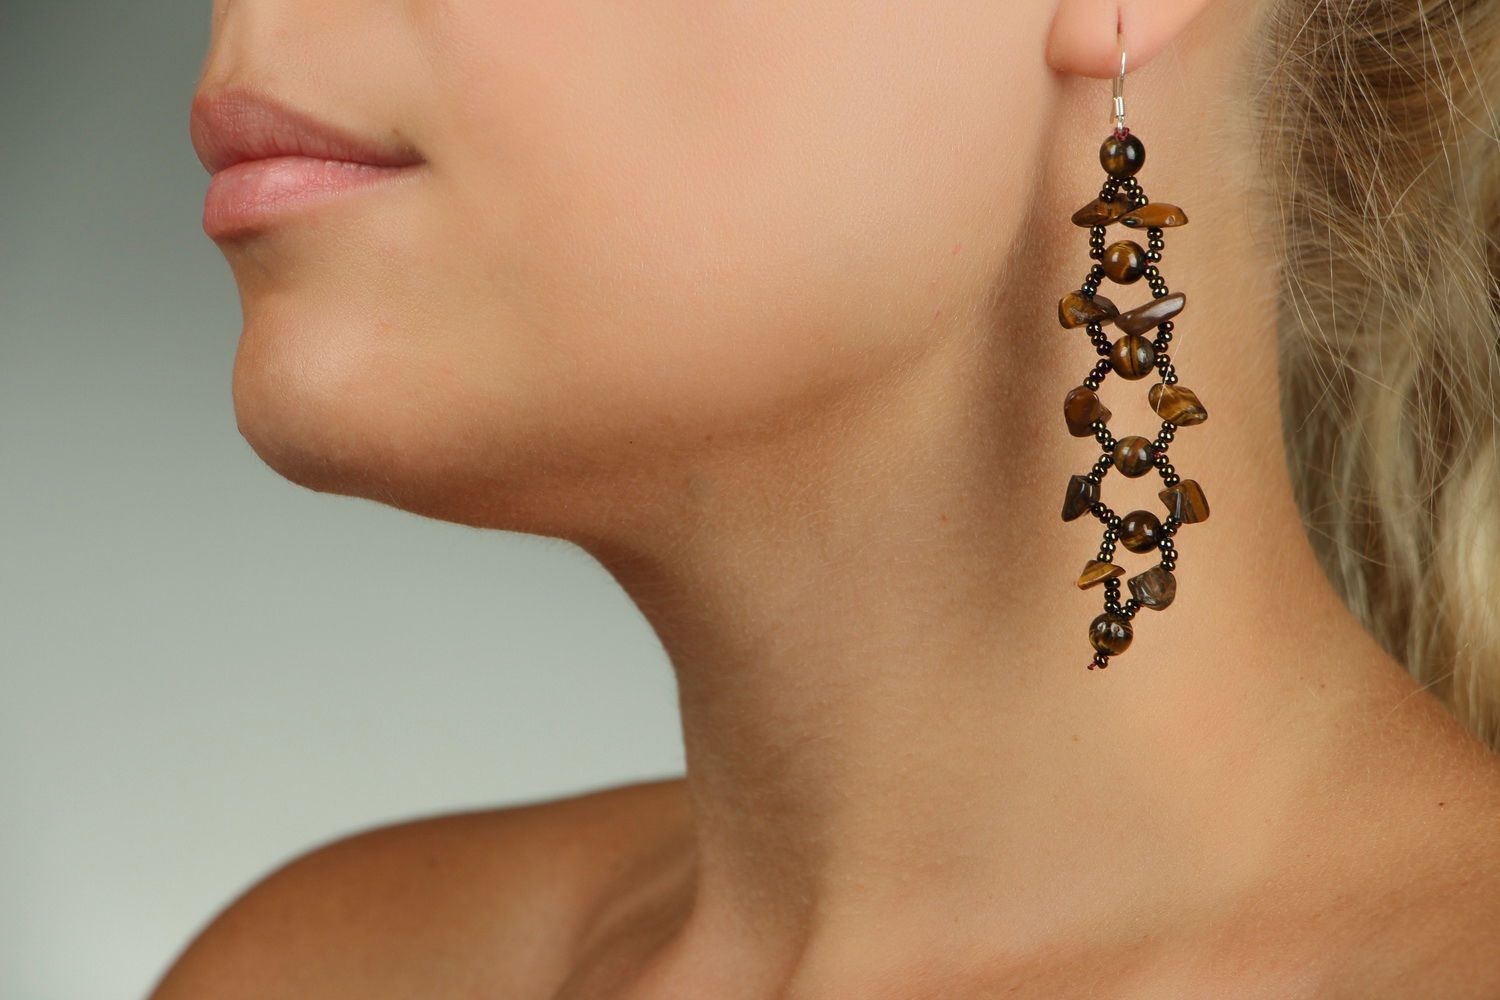 Pendent earrings made of Czech beads with tiger's eye stone photo 5